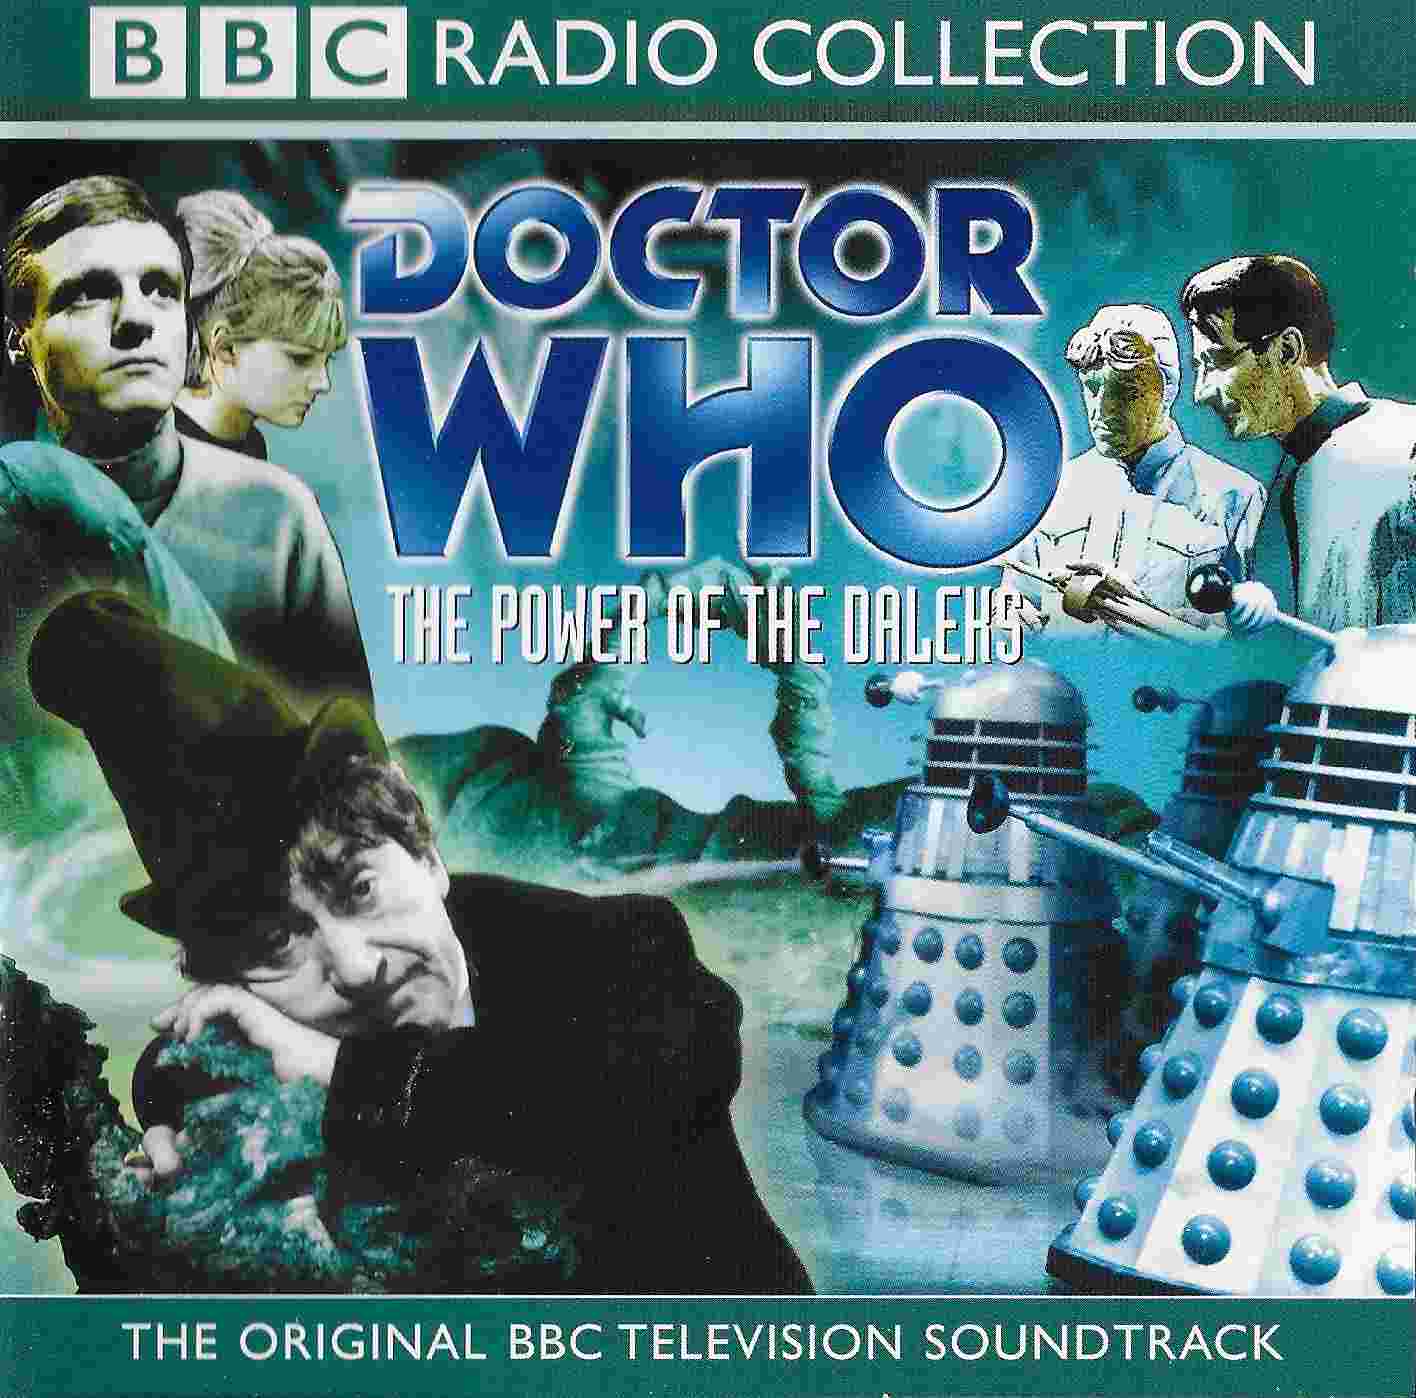 Picture of ISBN 0-563-49476-X1 Doctor Who - The power of the Daleks by artist David Whitaker from the BBC cds - Records and Tapes library